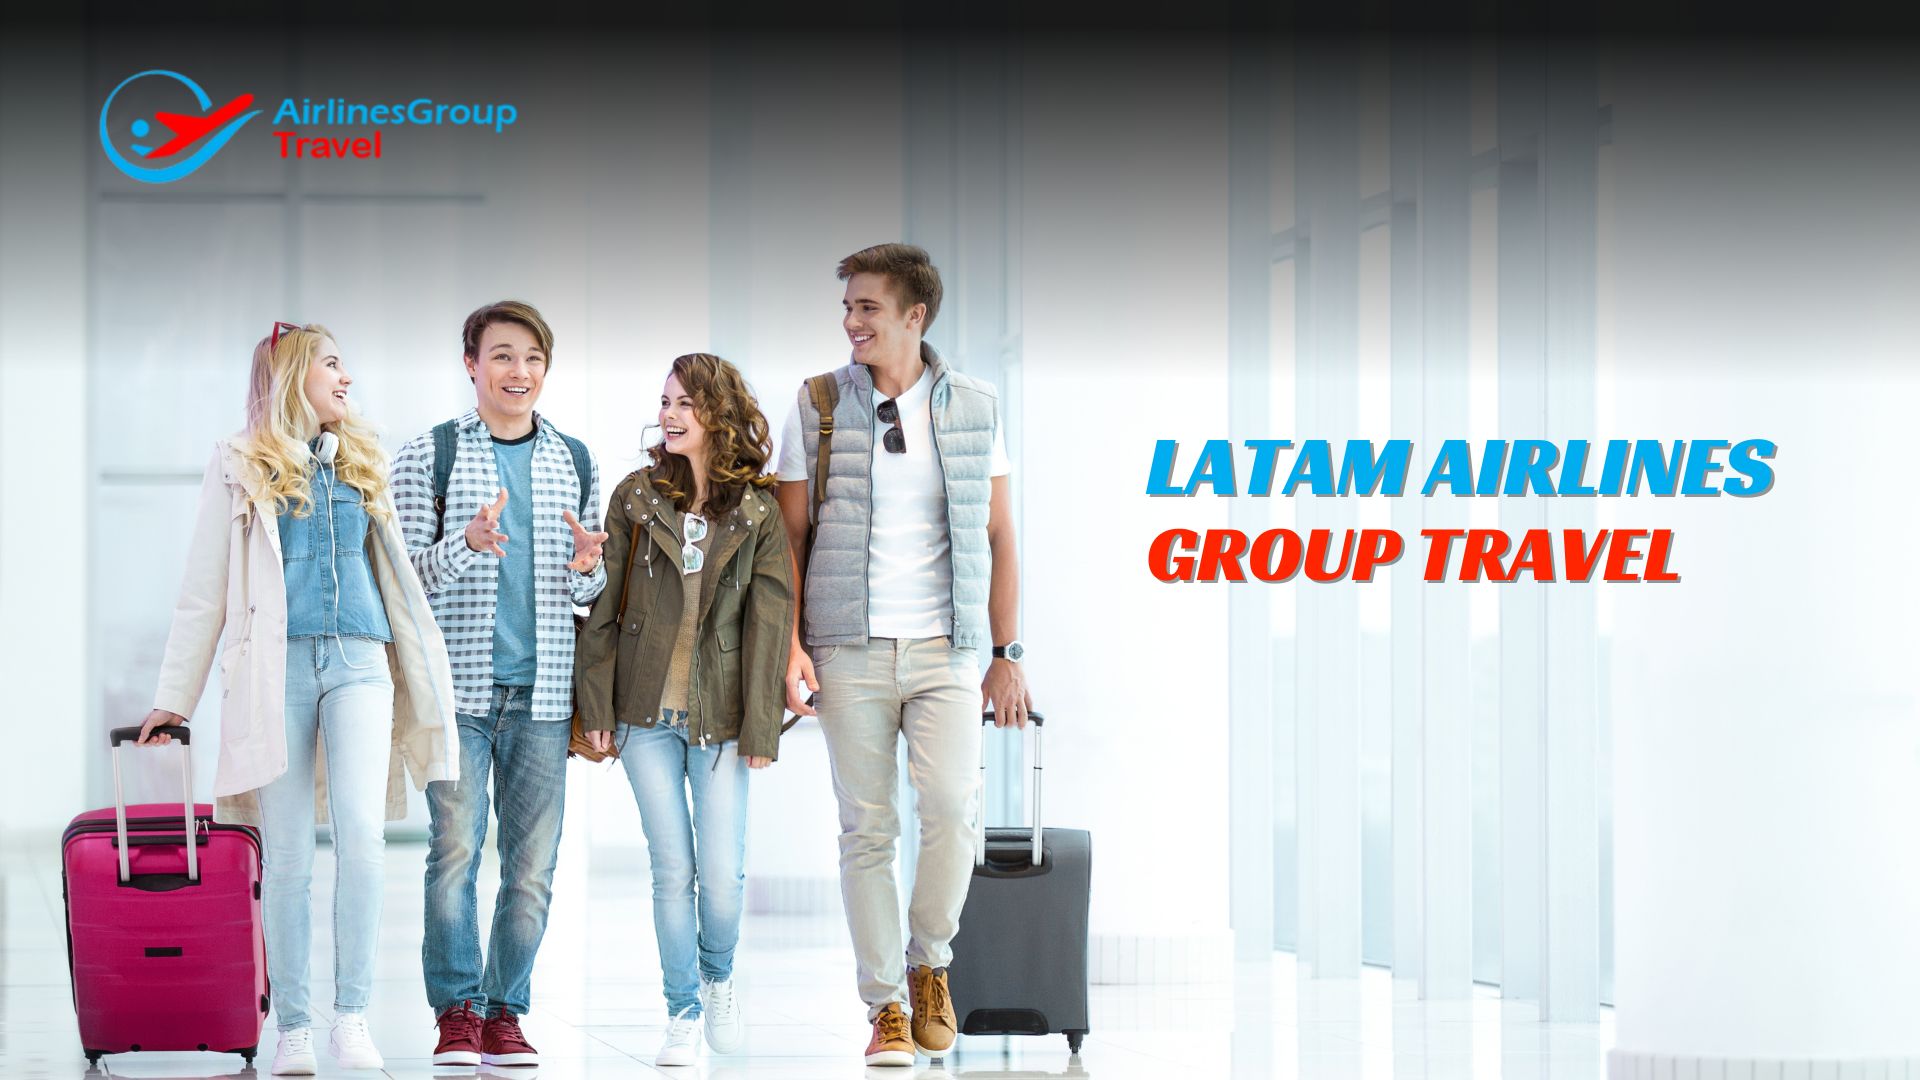 LATAM Airlines Group Travel